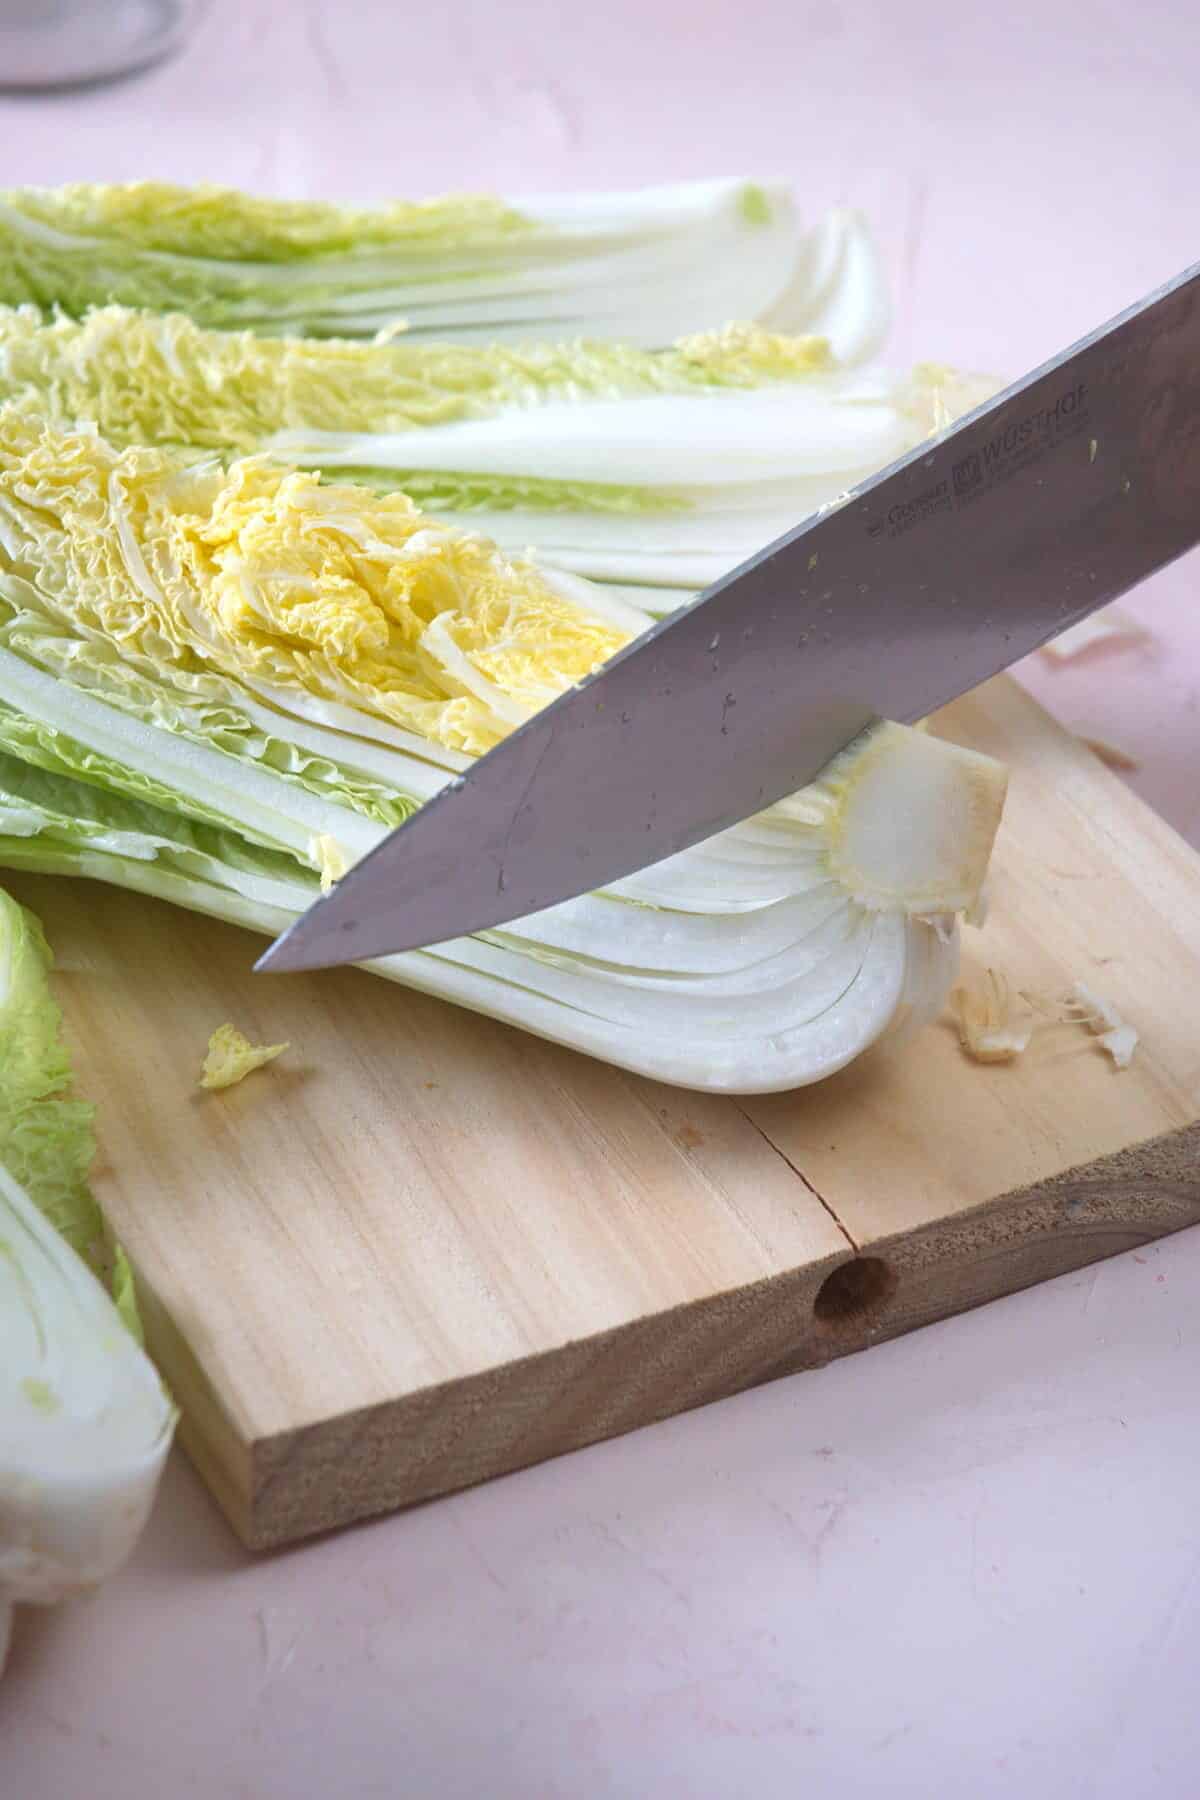 Napa cabbage and a chef's knife on a cutting board.